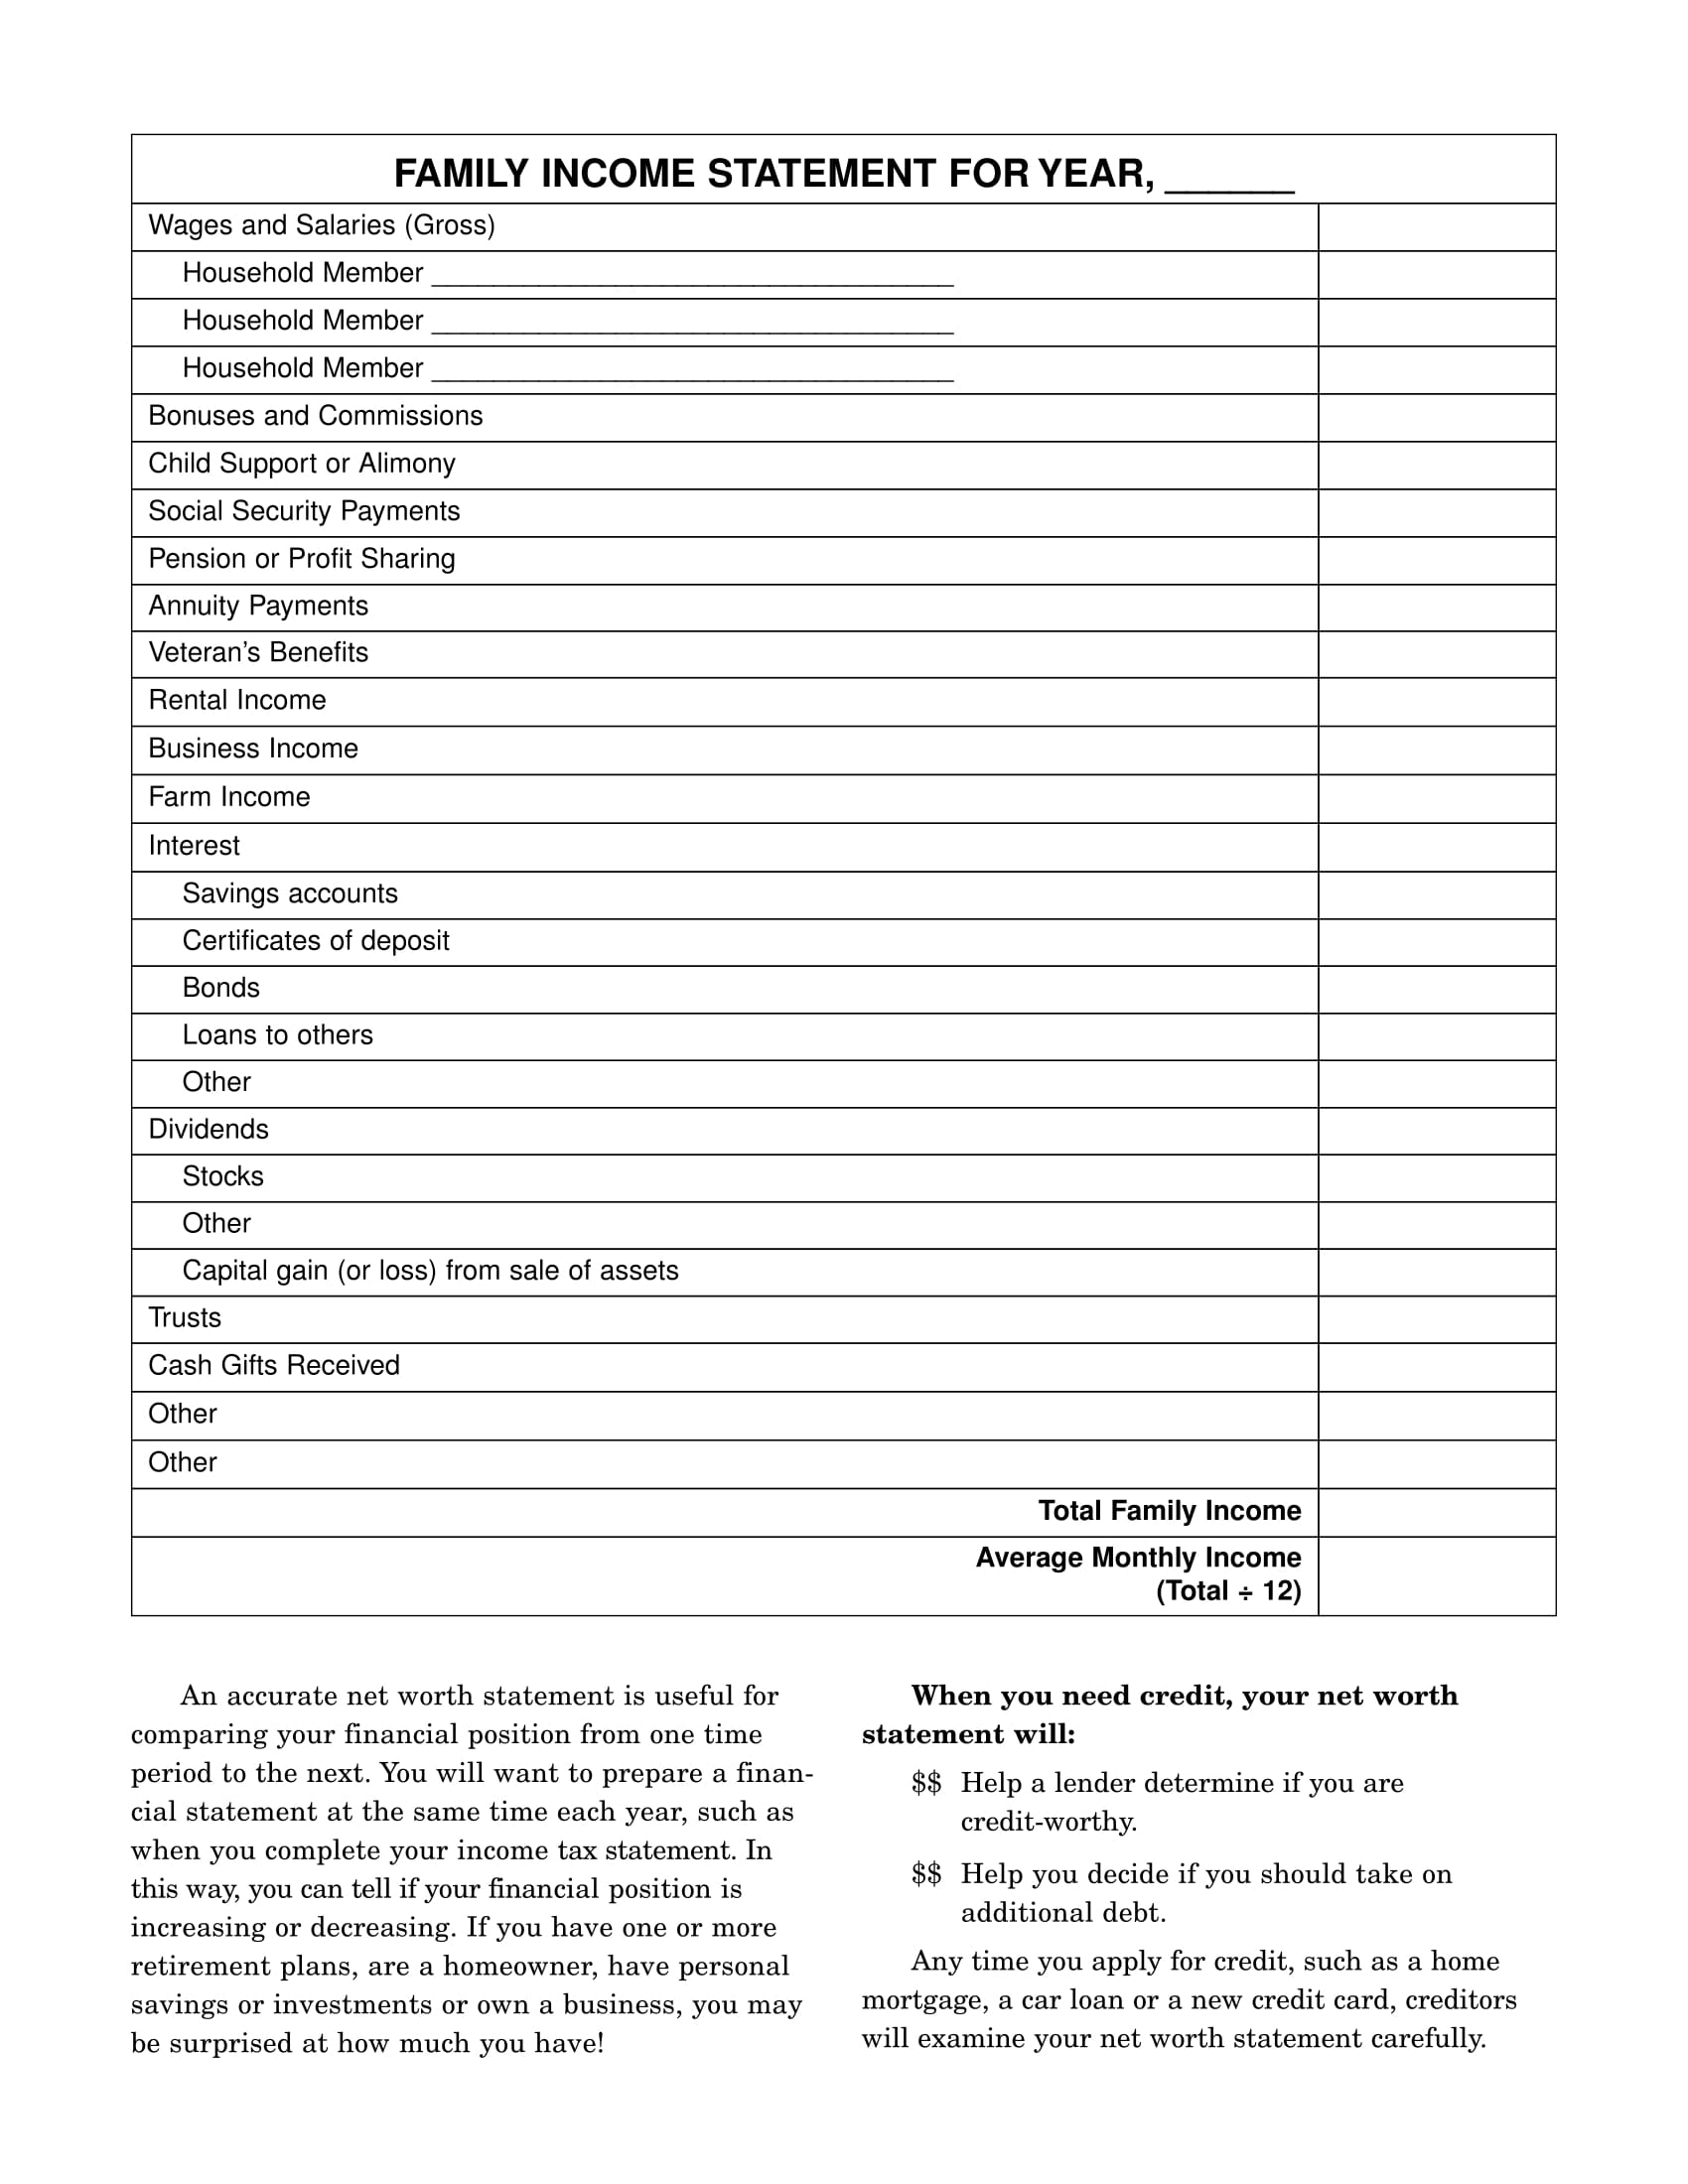 annual family income statement form 2